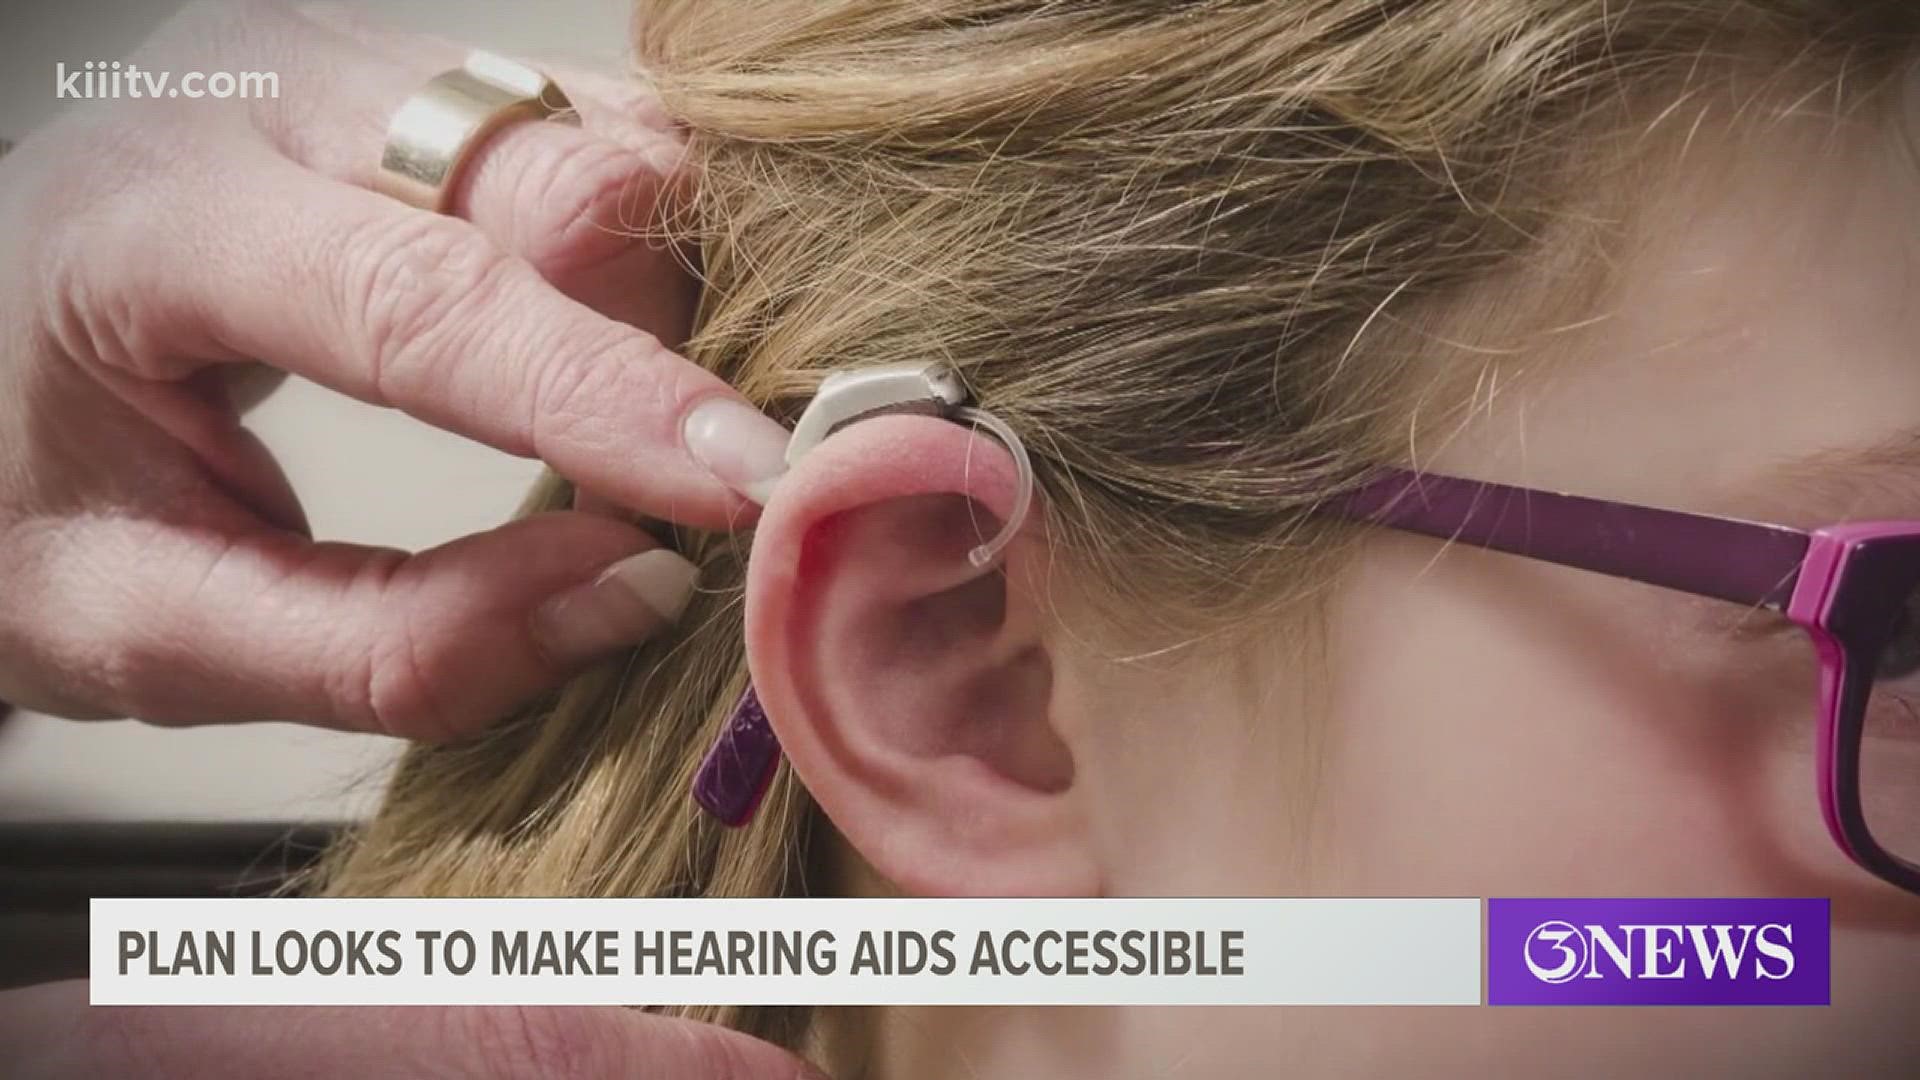 Tom Burnside with the Deaf and Hard of Hearing Center, a non-profit group in Corpus Christi, said it is a move that could help a certain segment of people.